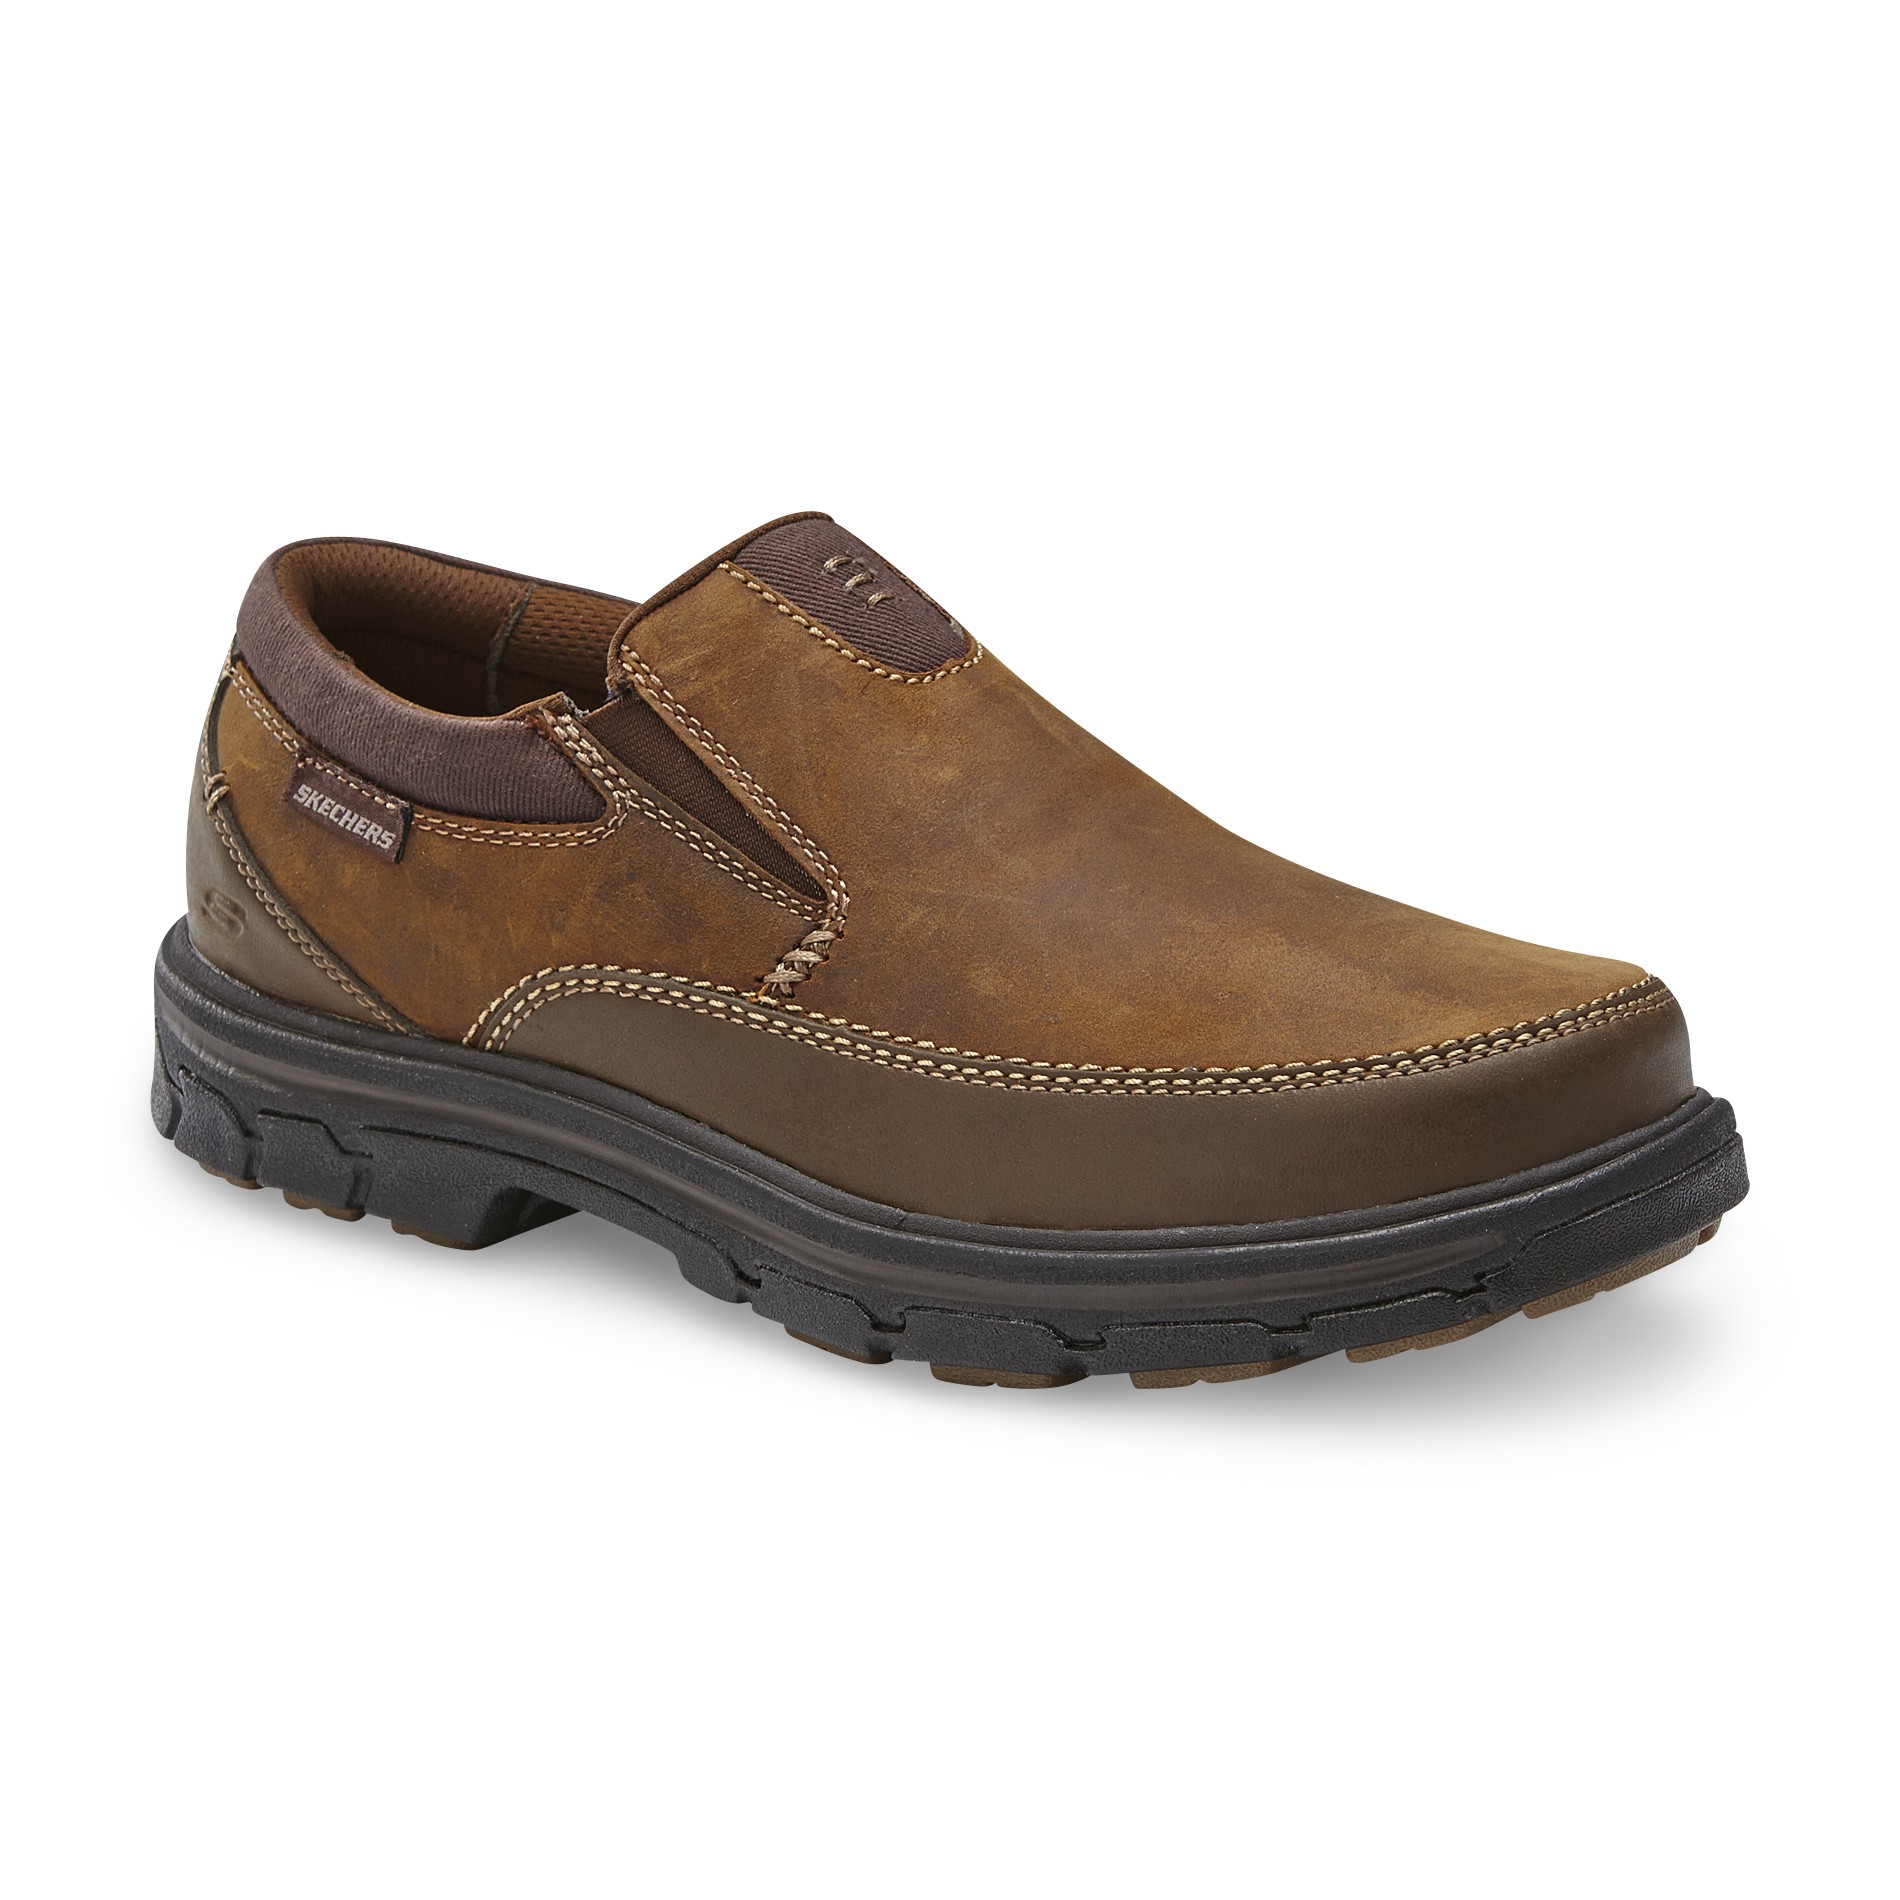 sears sketcher shoes